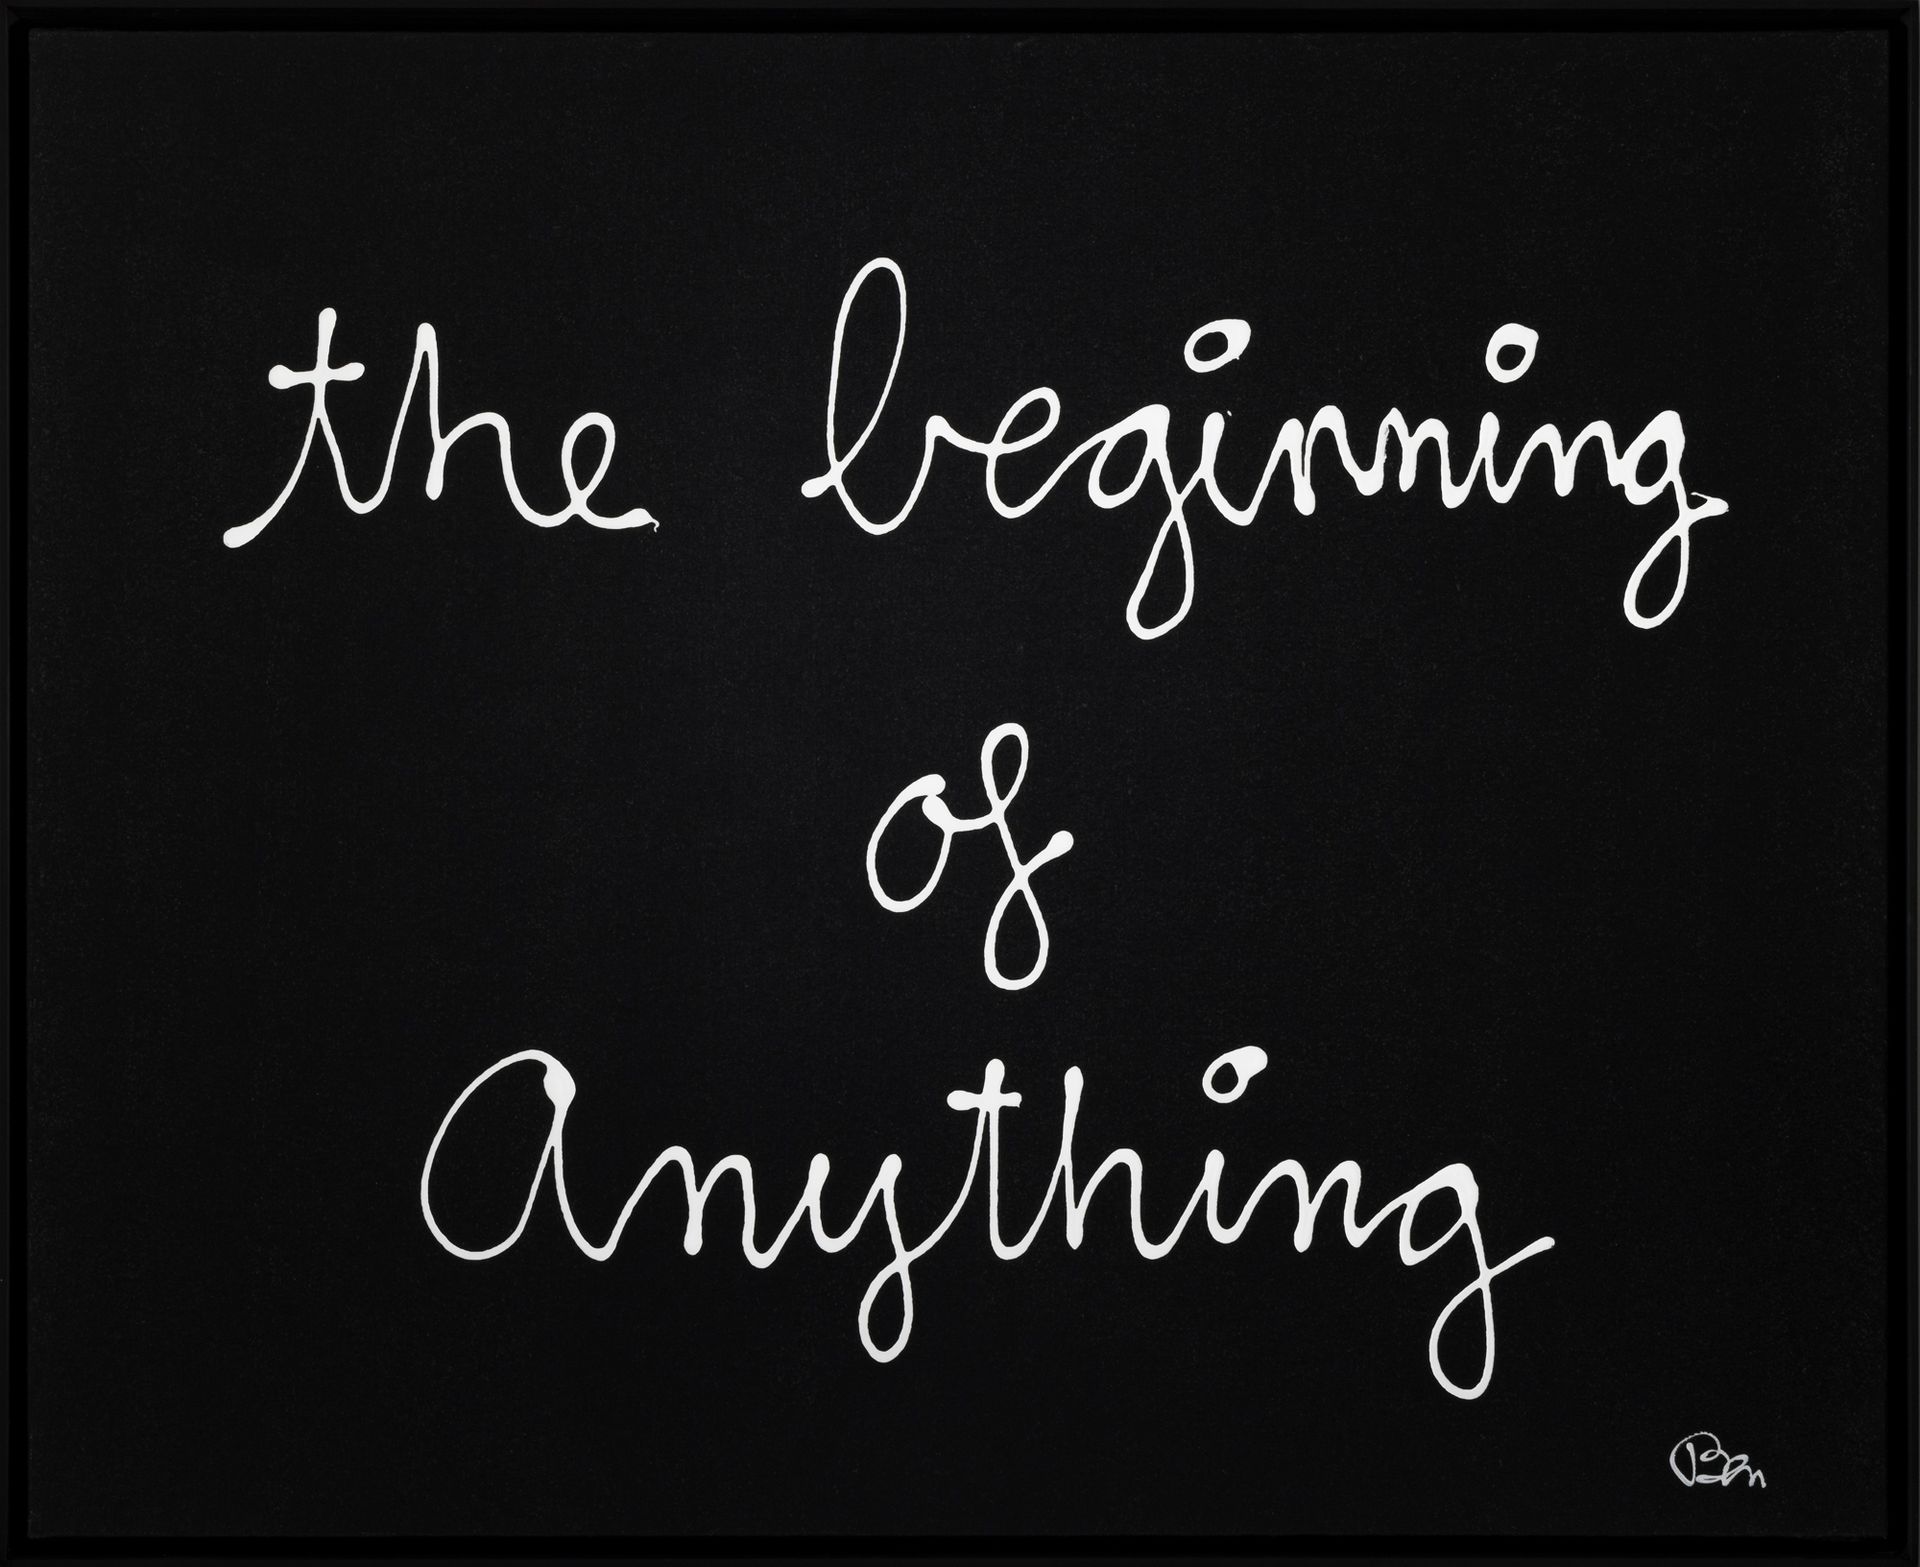 Ben VAUTIER (né en 1935) The beginning of anything, 2014
Acrylic on canvas
Signe&hellip;